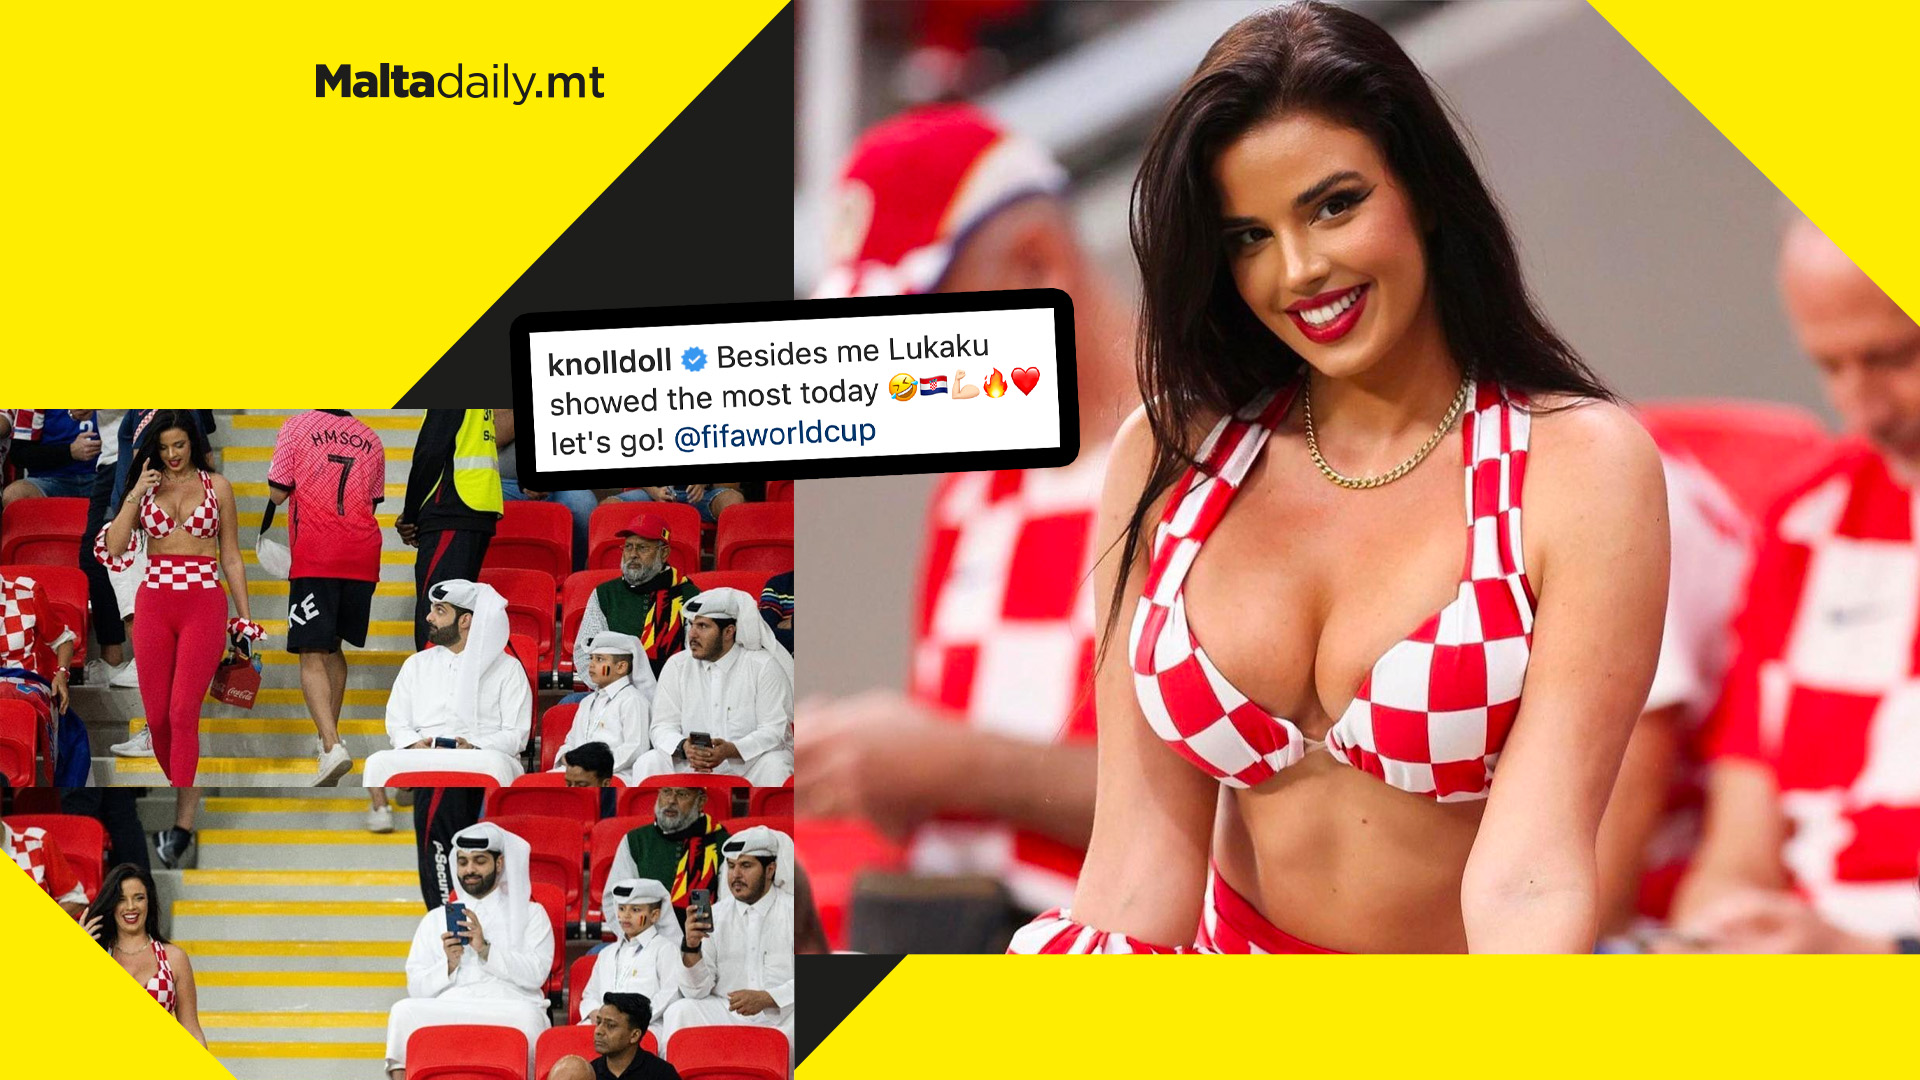 Miss Croatia not afraid of being arrested for racy outfits at Qatar World Cup